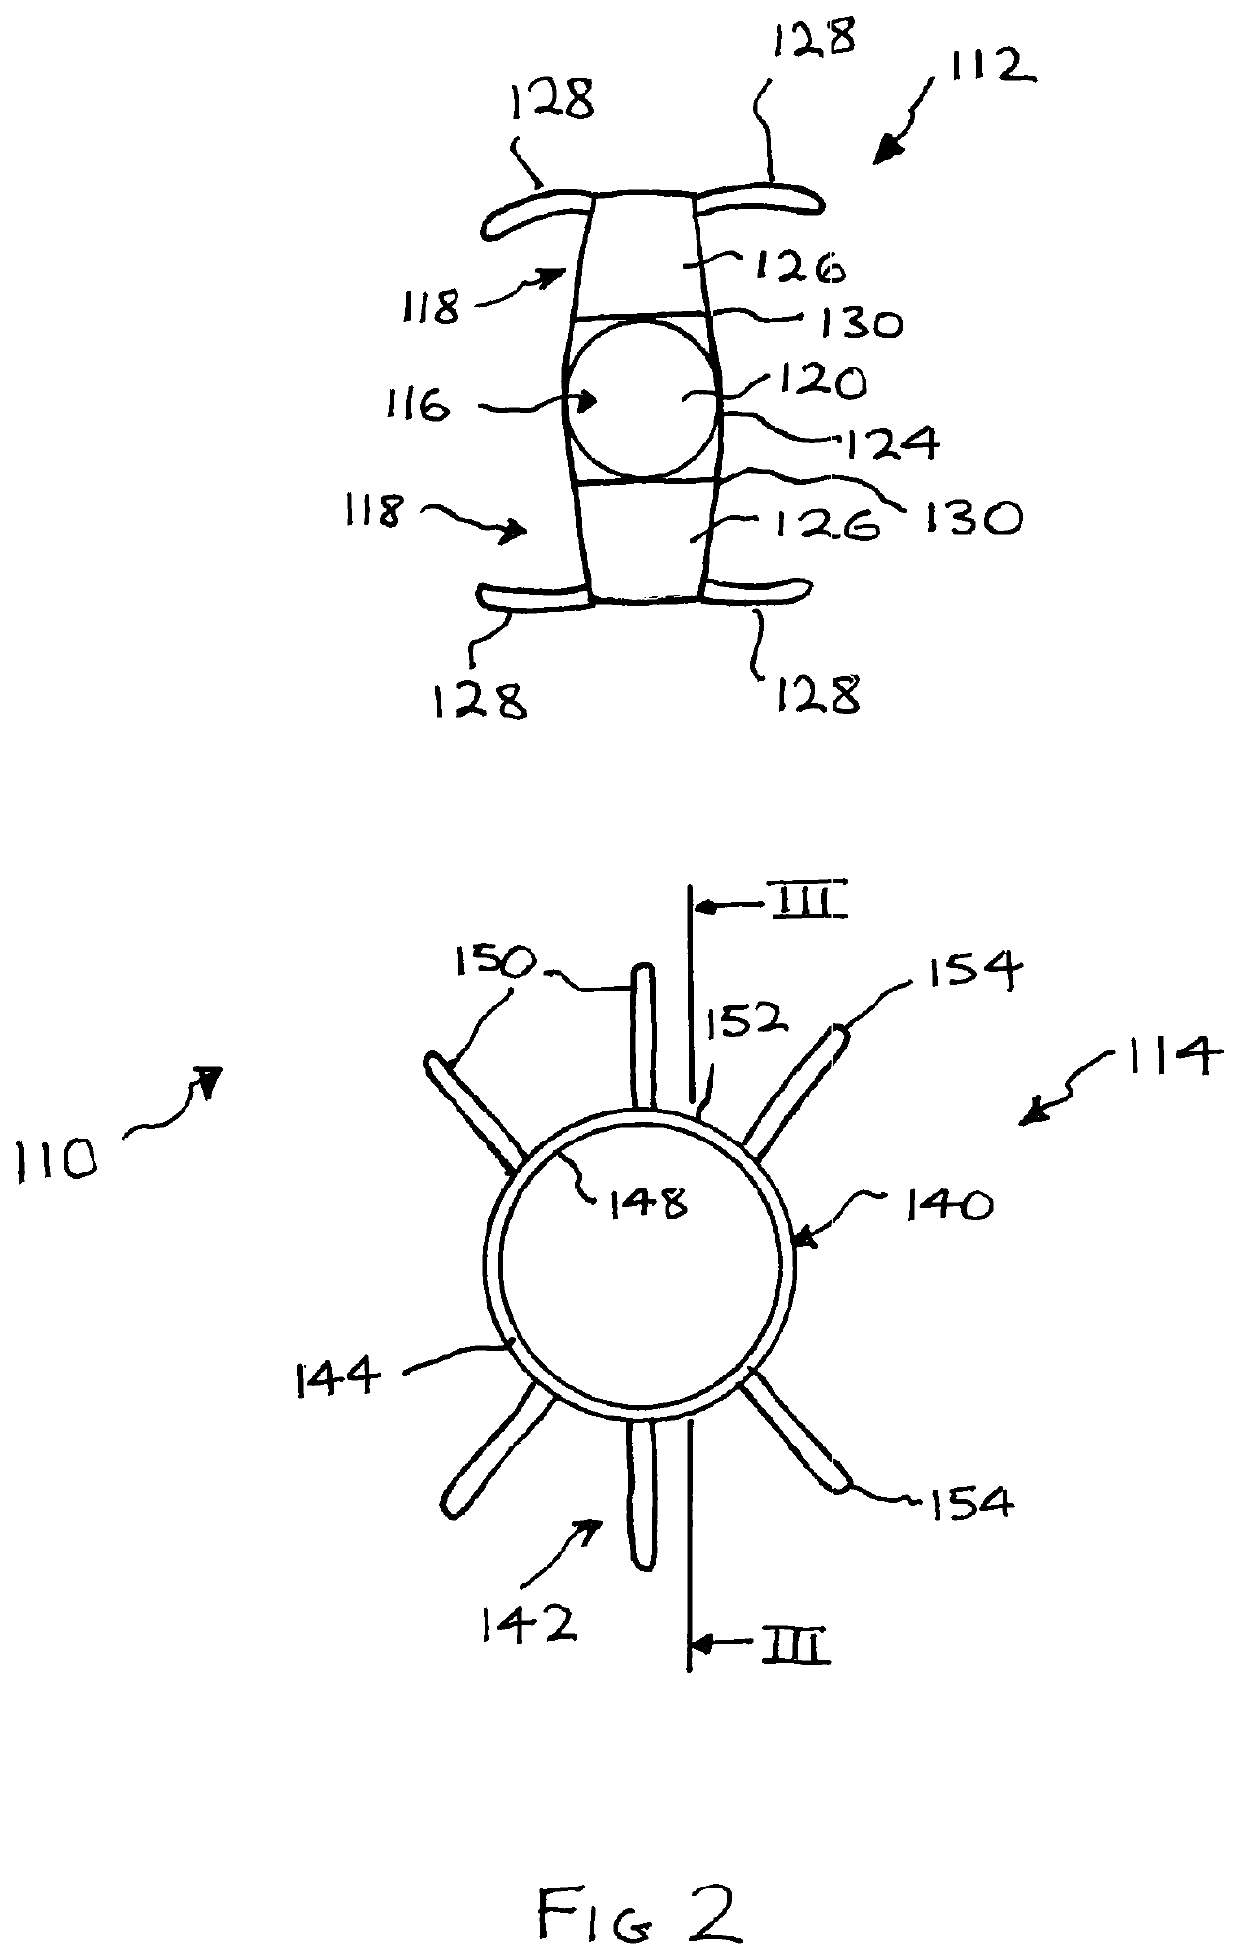 Accommodating intraocular lens systems and intraocular lens focusers